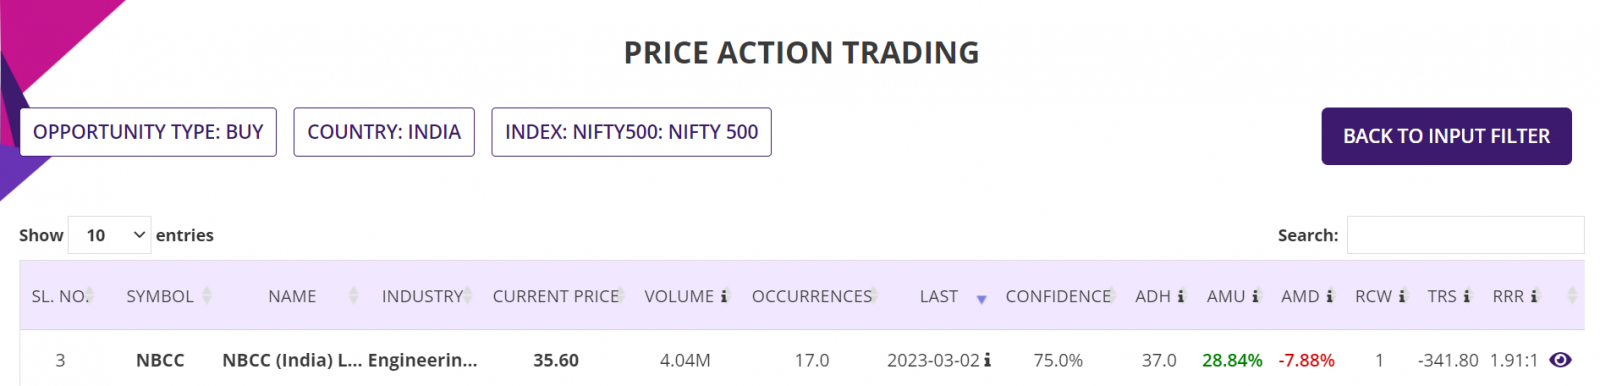 Price action trading strategy, summary report, NIFTY 500 Stocks